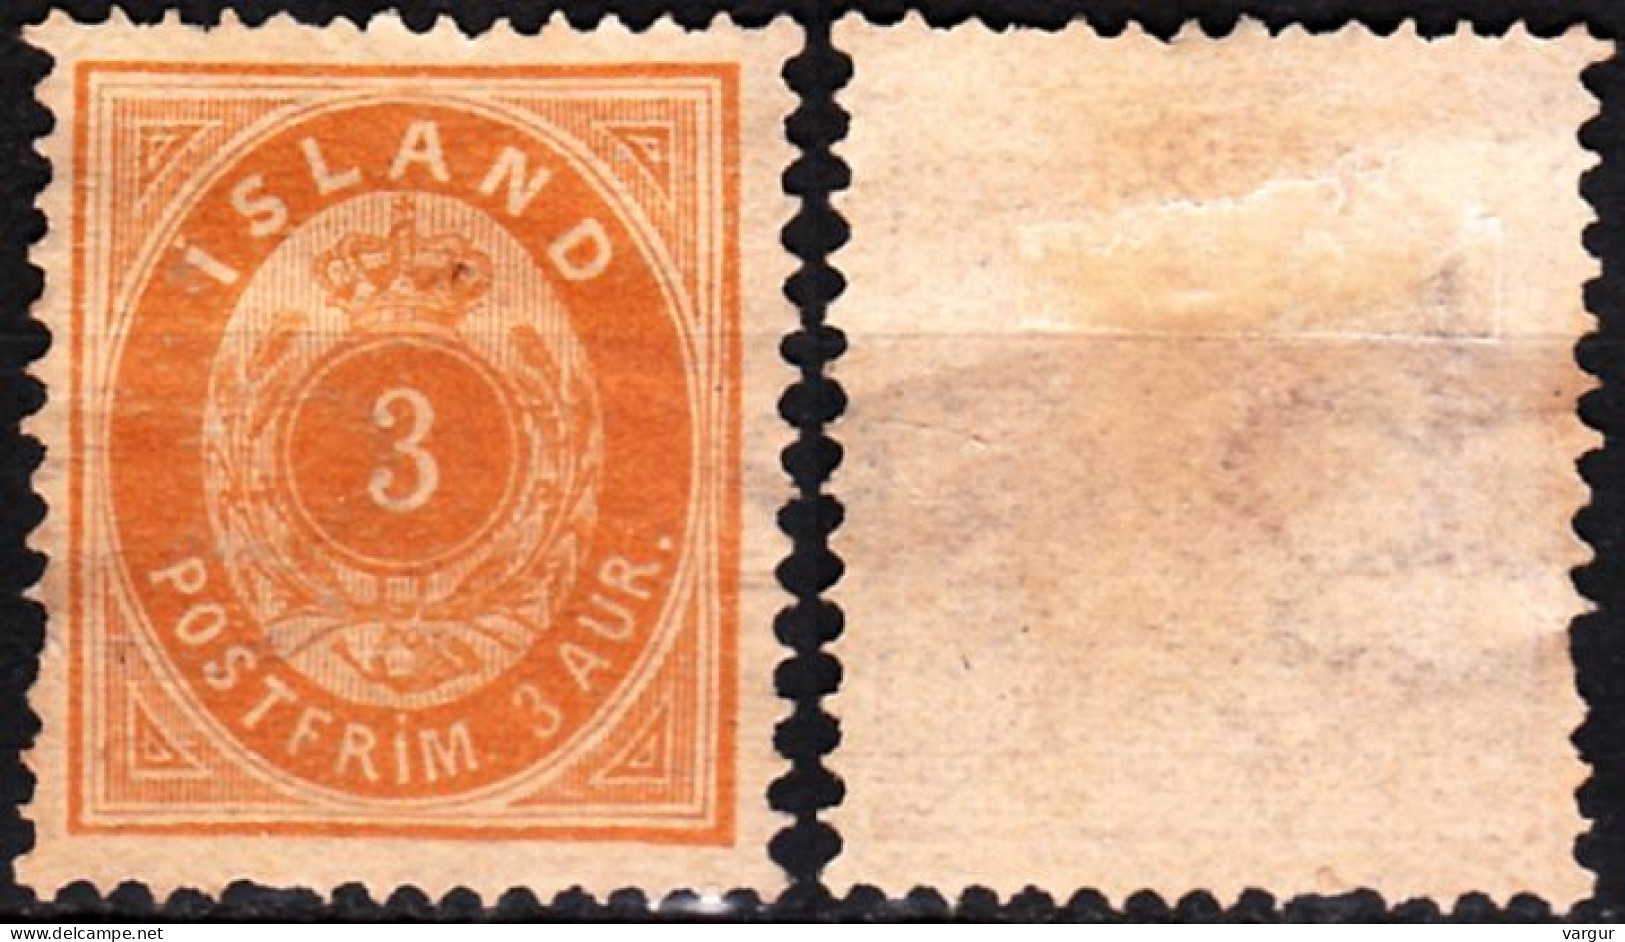 ICELAND / ISLAND 1901 Figure In Oval. 3A Large 3, MH No Gum - Unused Stamps